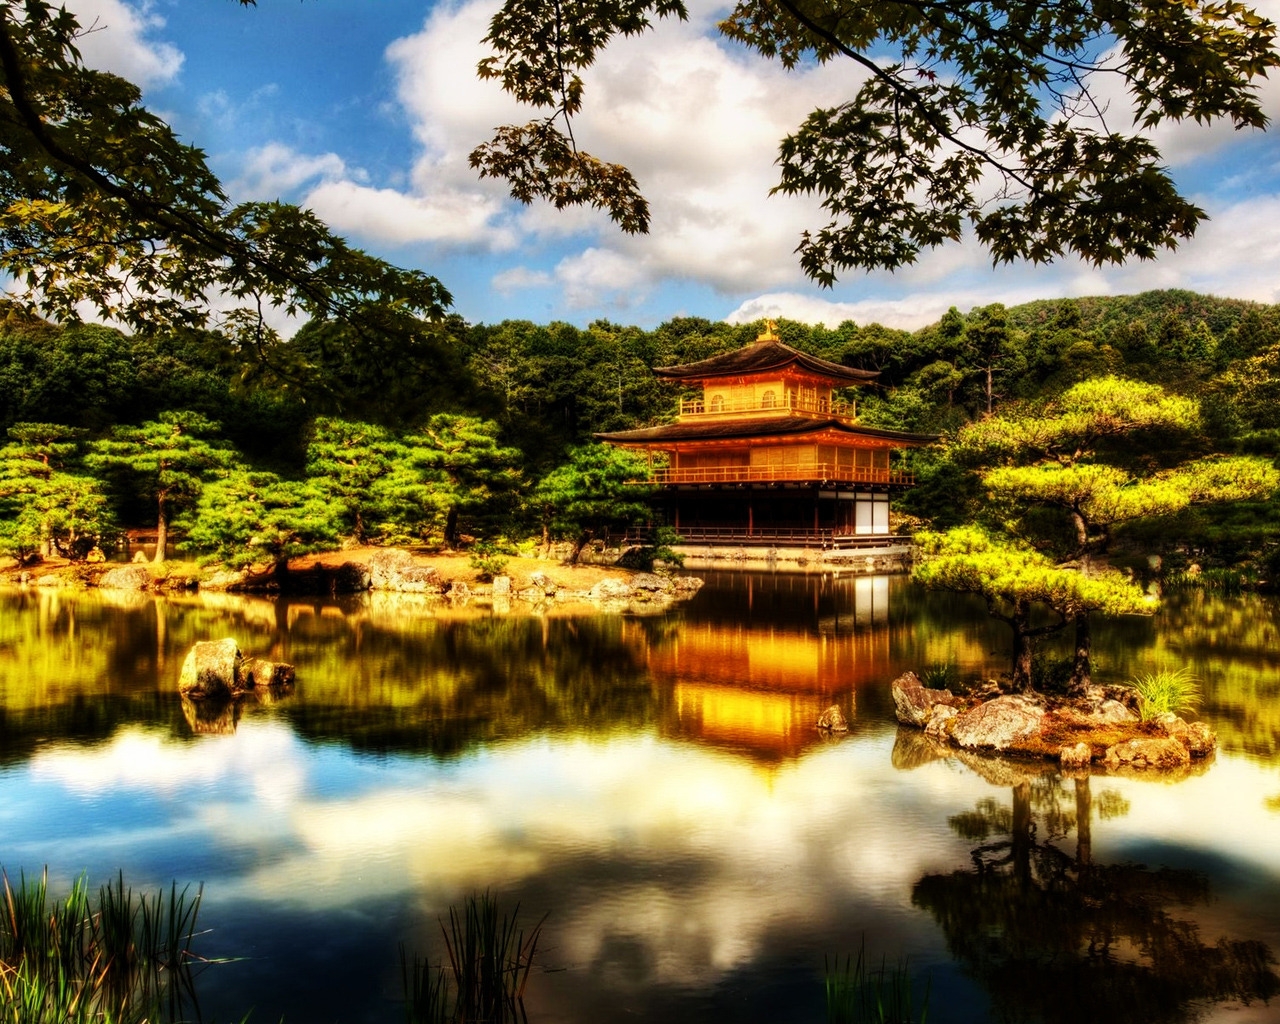 Great Japanese Temple for 1280 x 1024 resolution